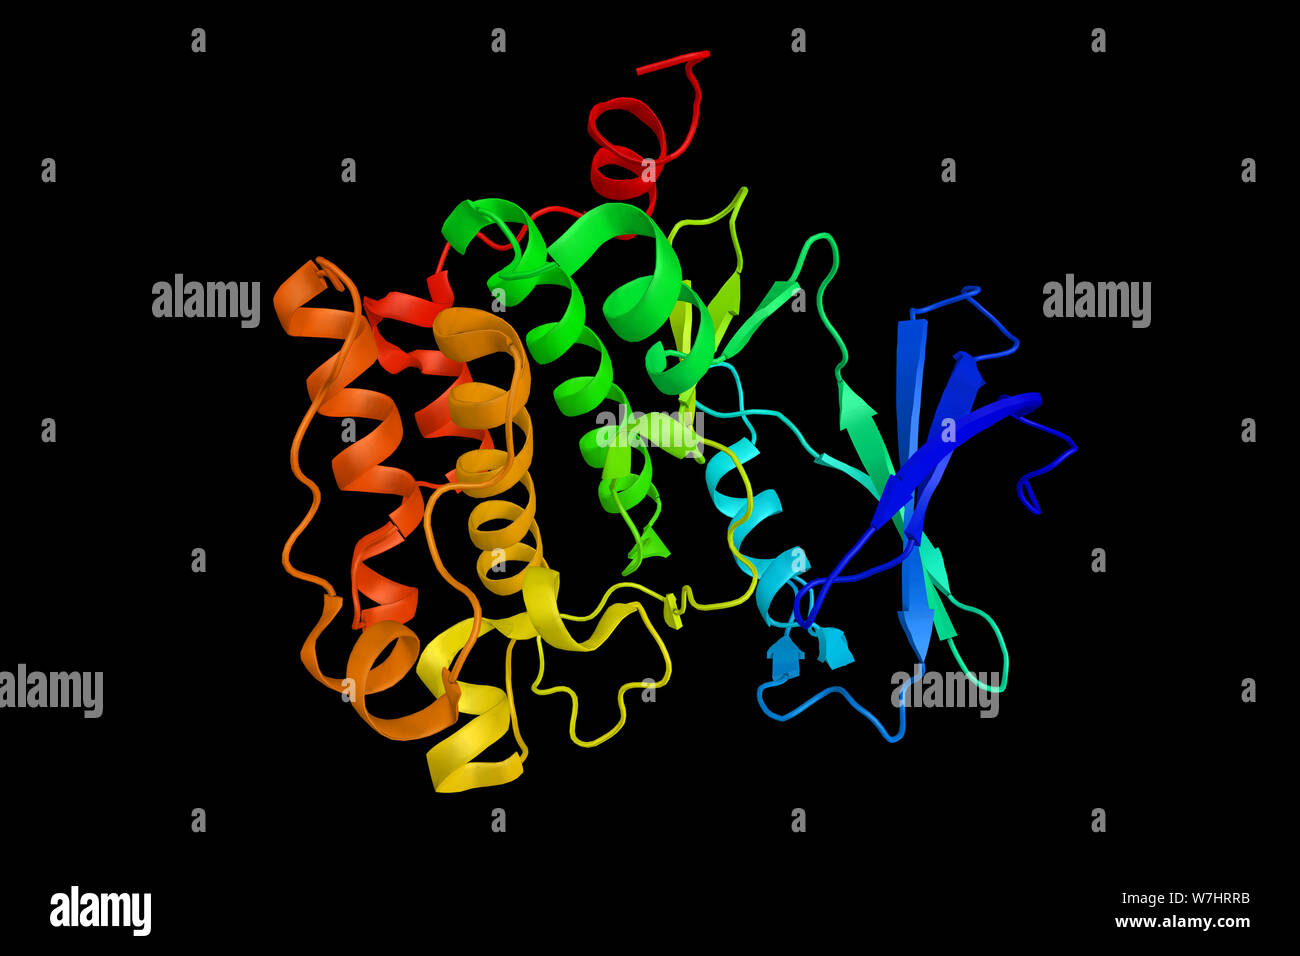 PIM1, a proto-oncogene which encodes for the serine/threonine kinase of the same name. 3d rendering. Stock Photo